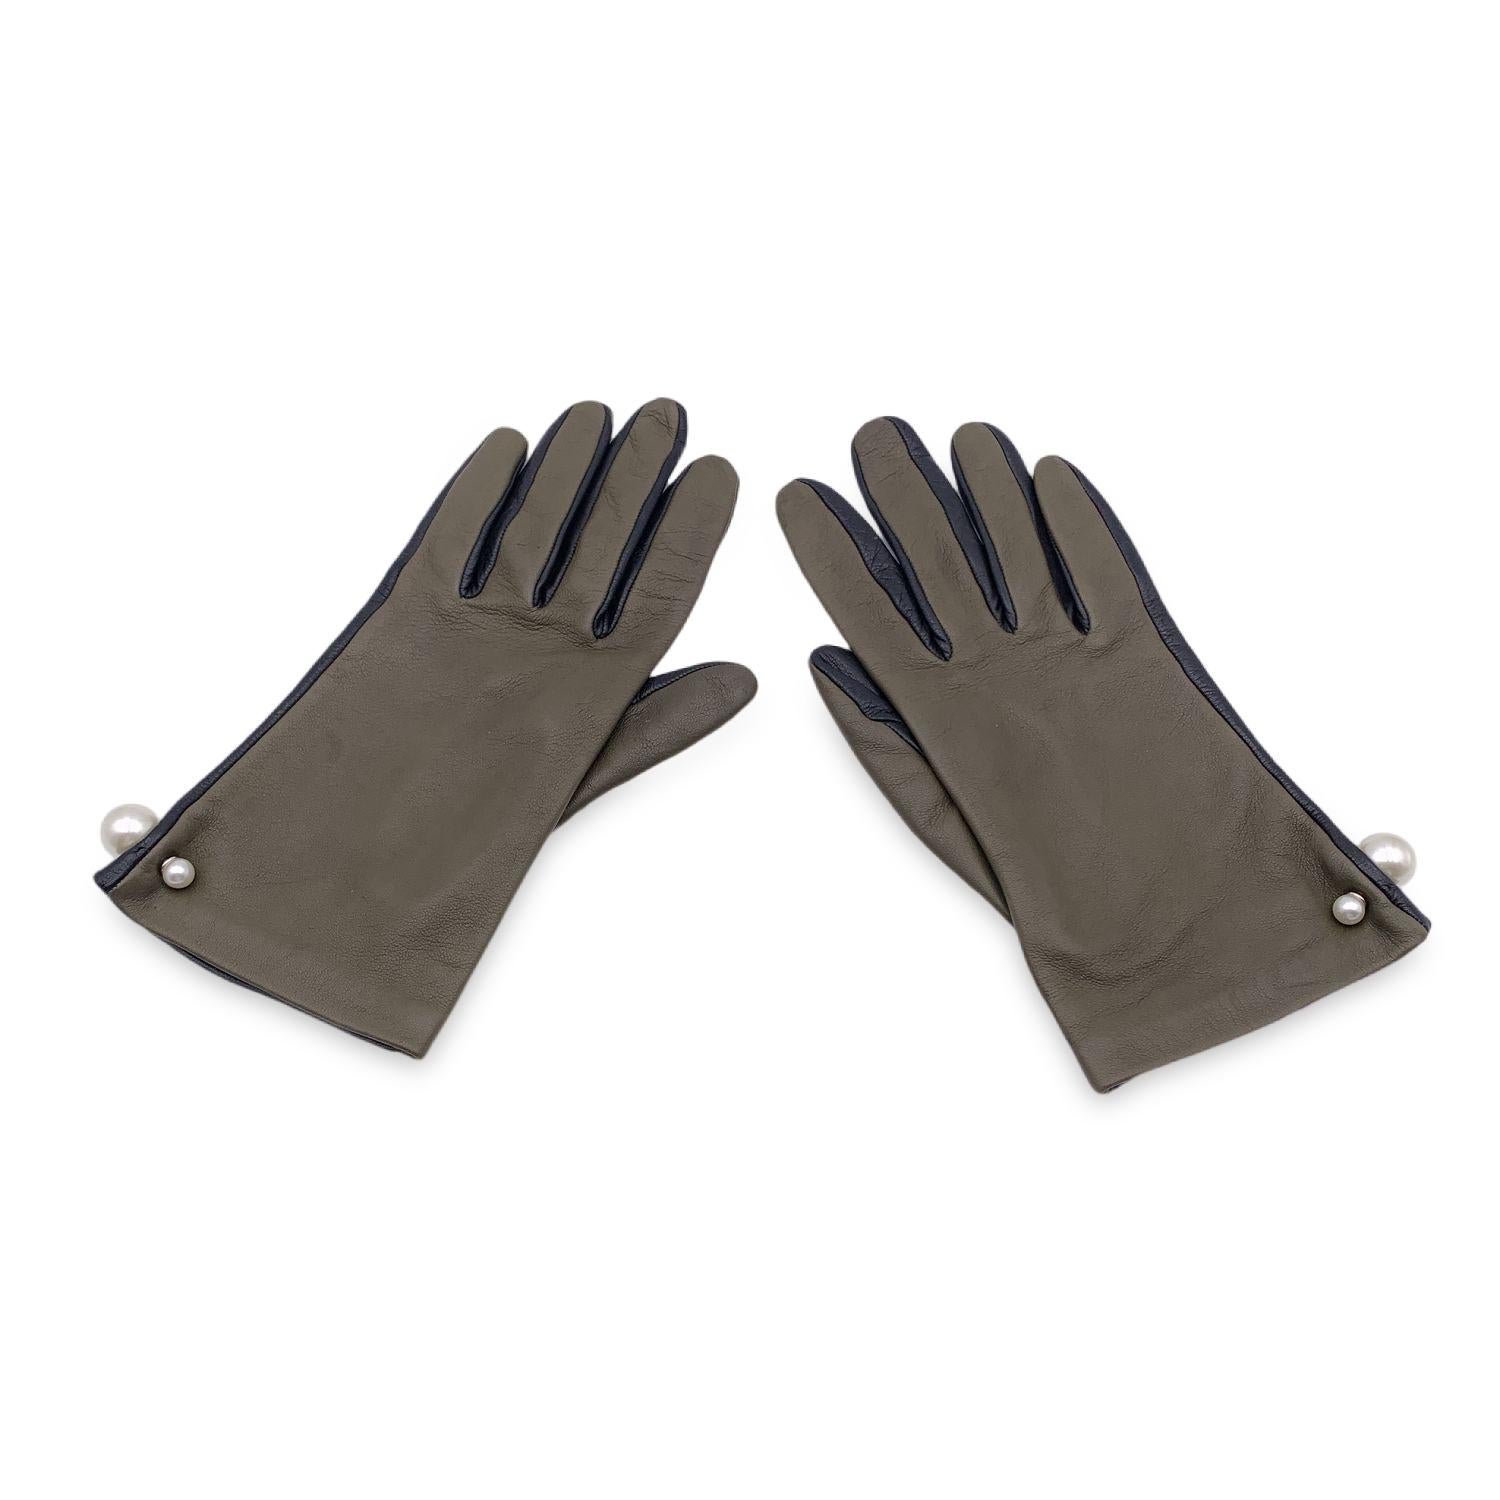 Elegant Tribales Gloves by Dior in military green and black leather. Dior Tribales buttons with white resin pearls. 100% lambskin. Made in France. Size 7.5 (medium size)



Details

MATERIAL: Leather

COLOR: Green

MODEL: Tribales

GENDER: